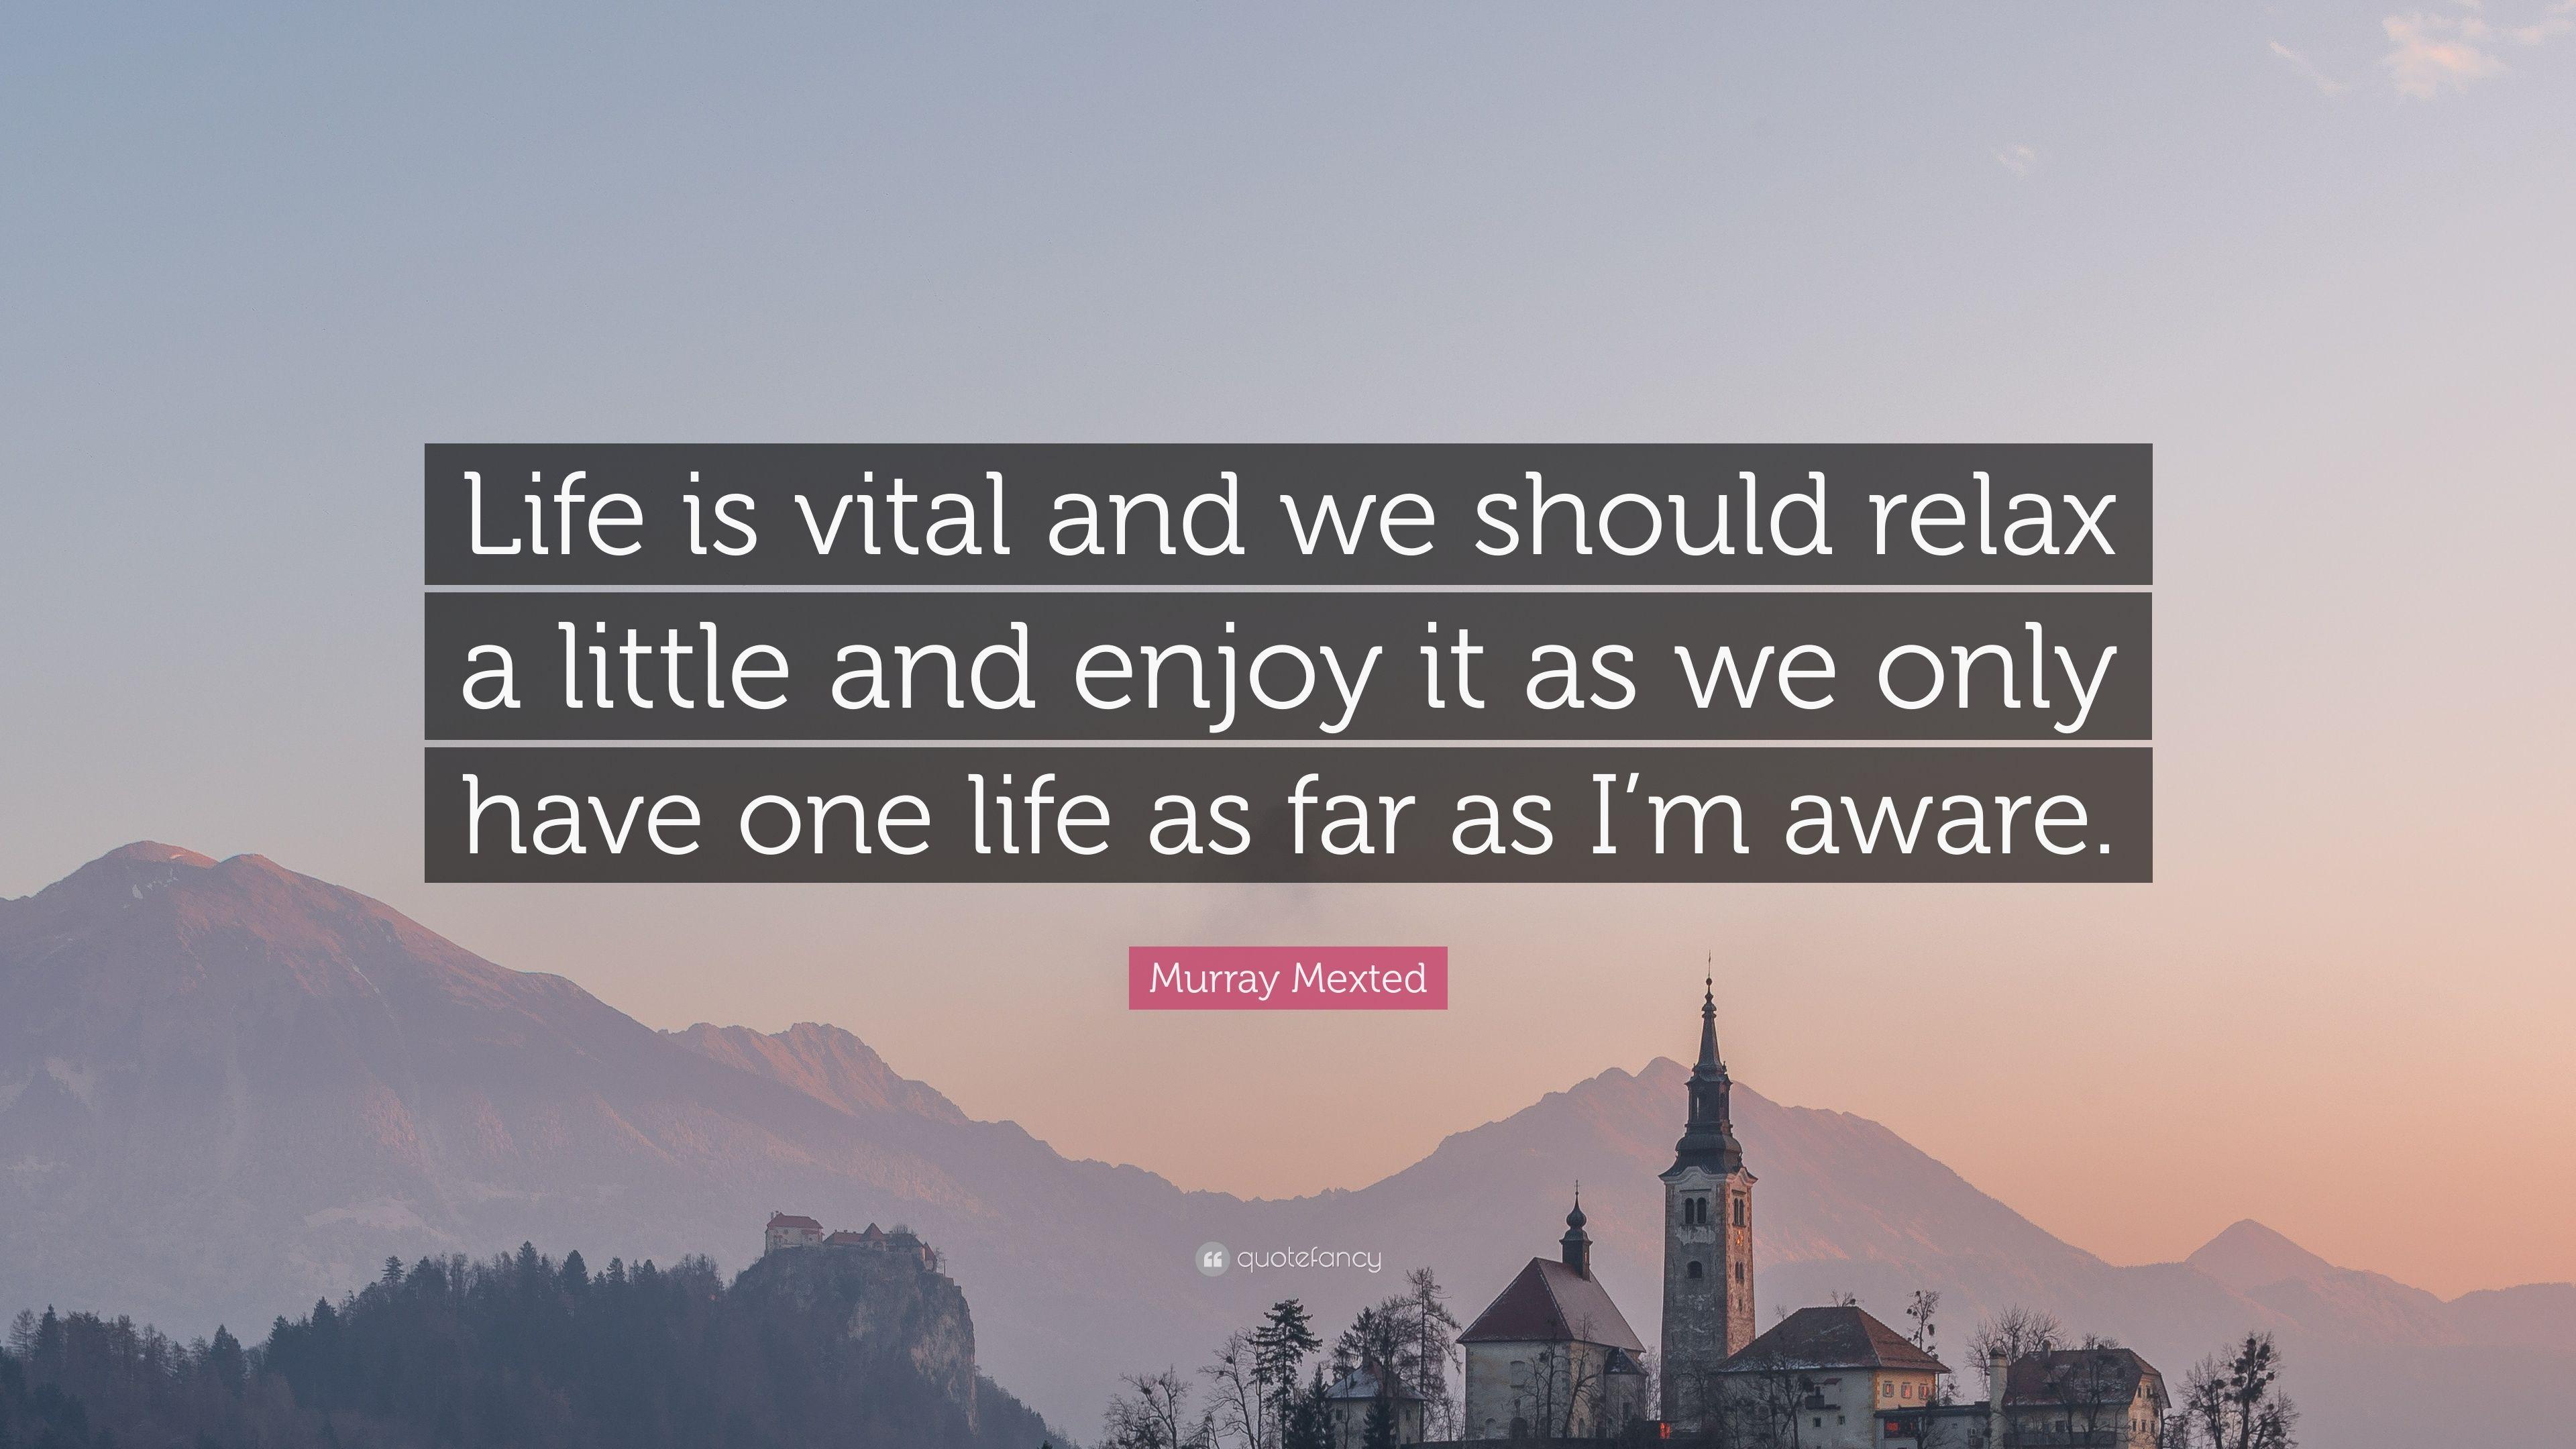 Murray Mexted Quote: “Life is vital and we should relax a